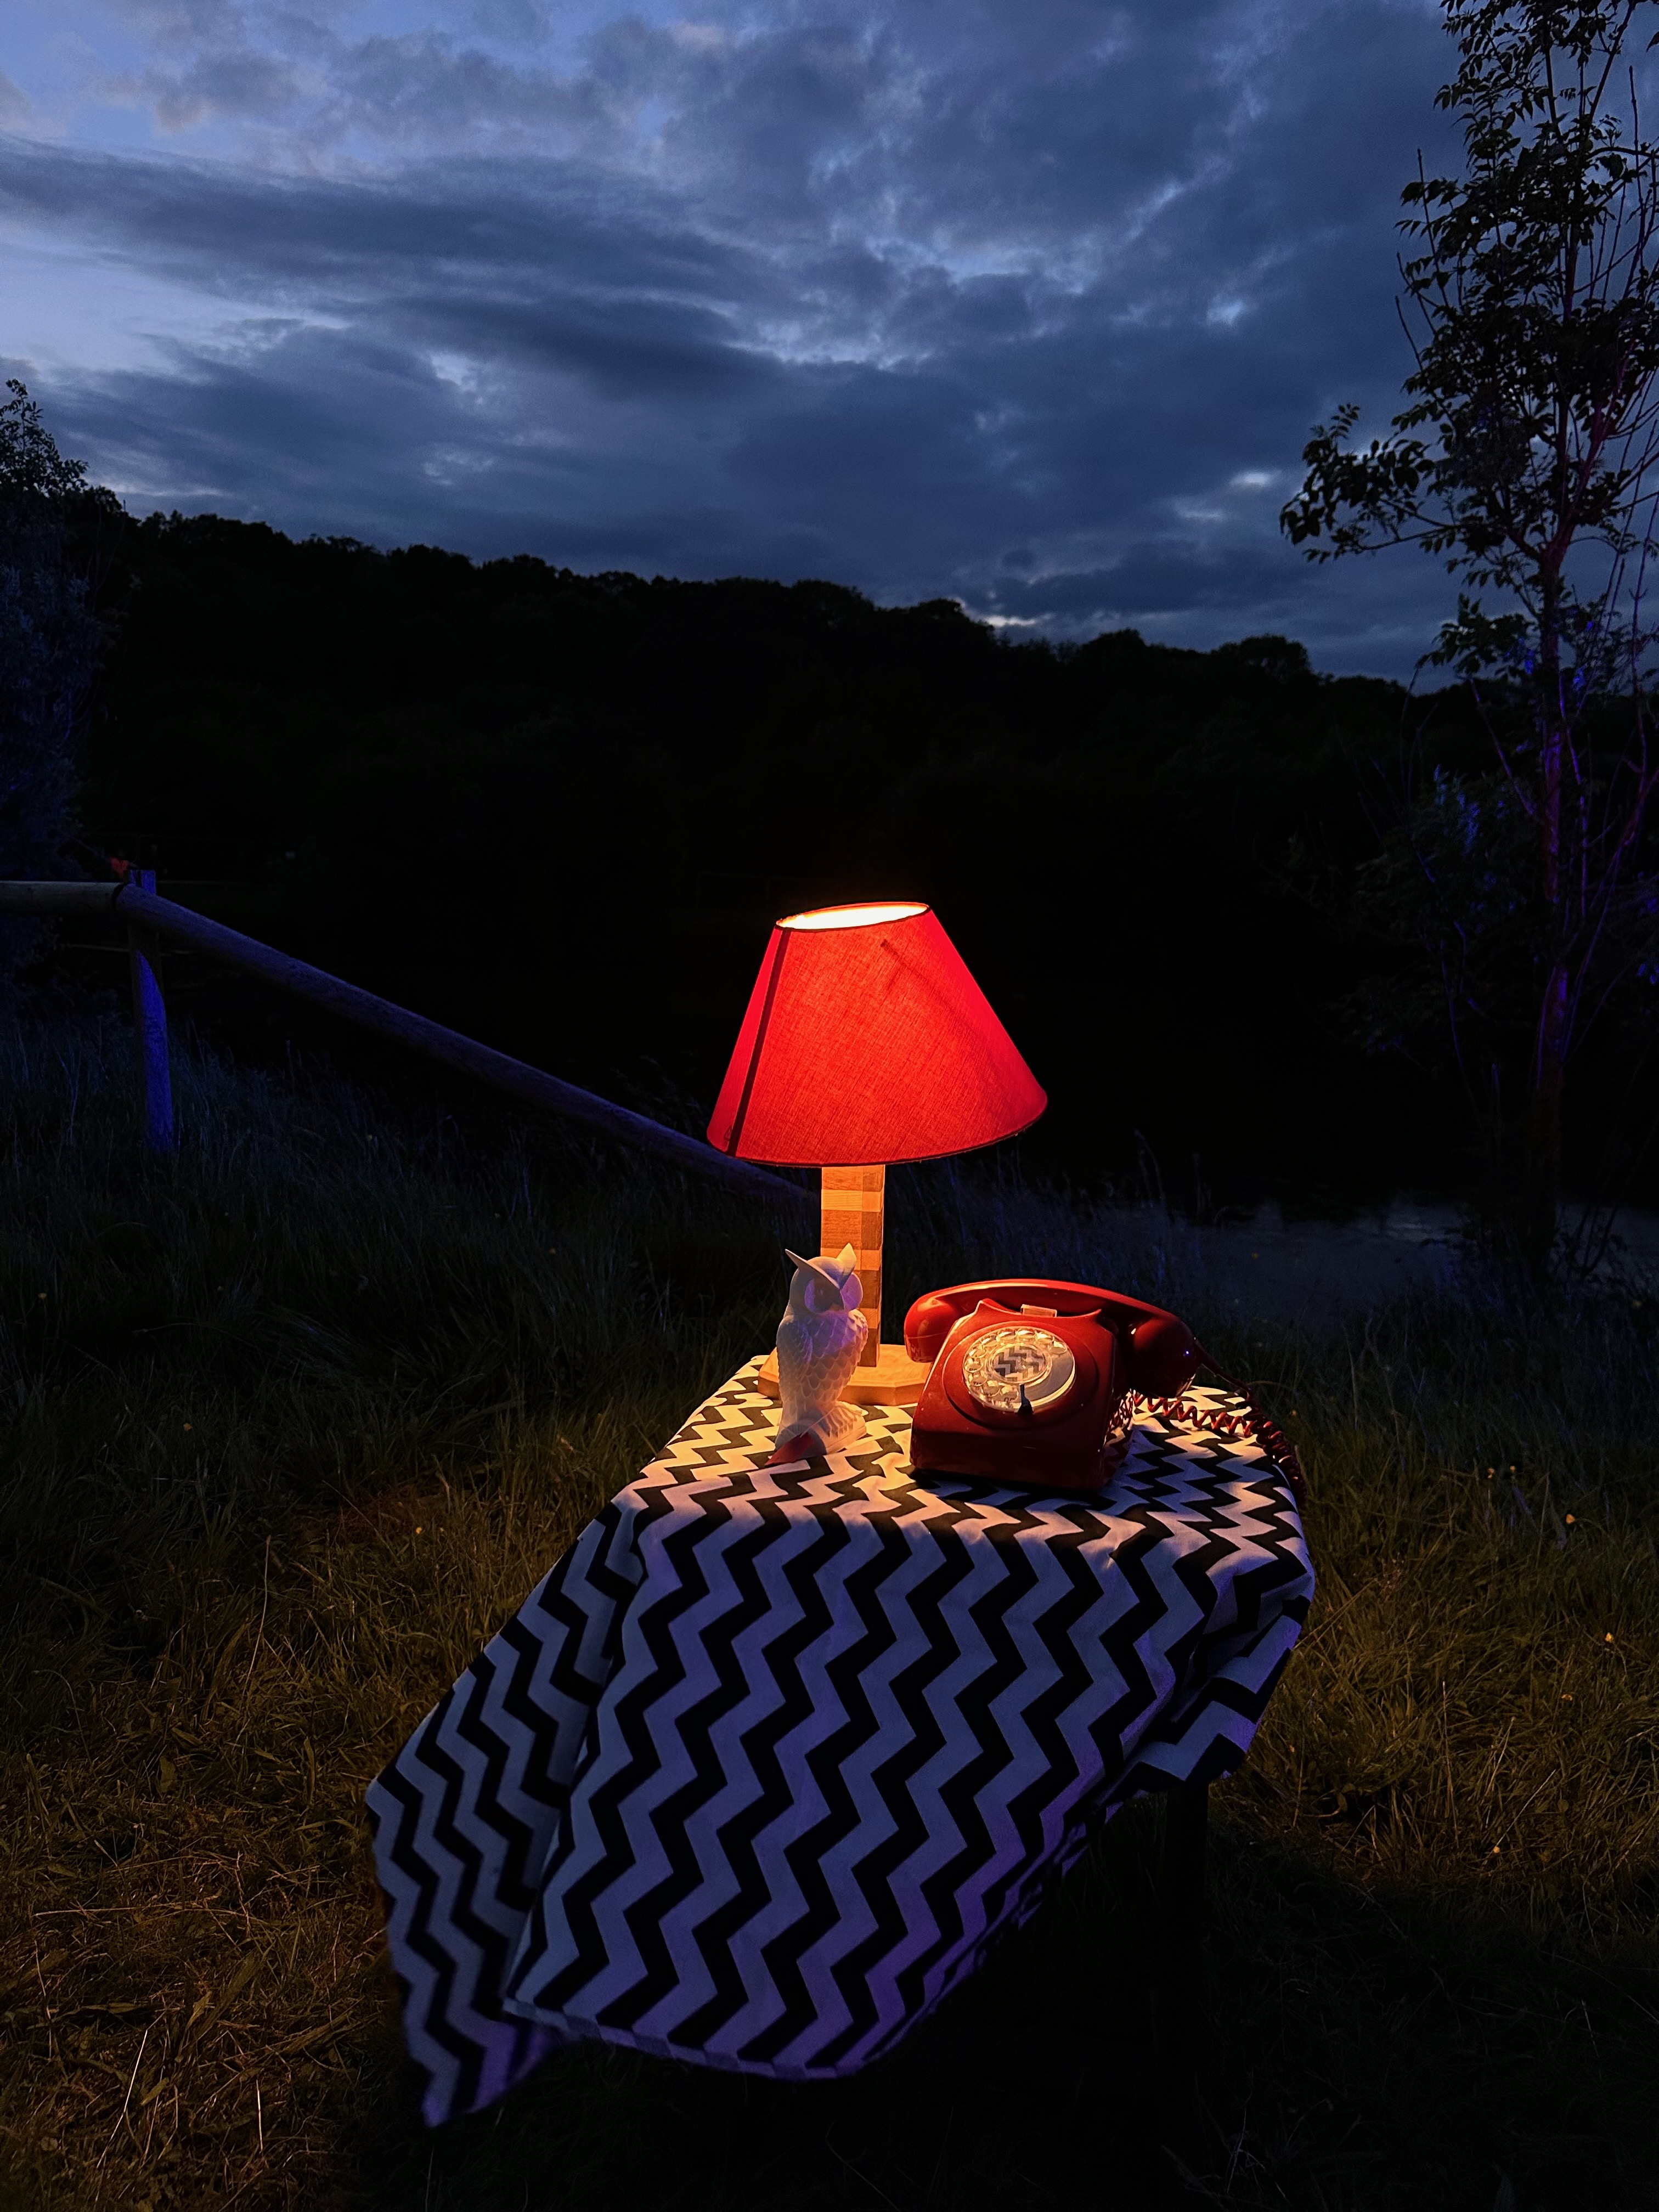 In a dark field, a small square table is covered with a blue and white striped table cloth. On the table stands a red telephone and a white owl. The scene is lit by a small round lamp at the back of the table.